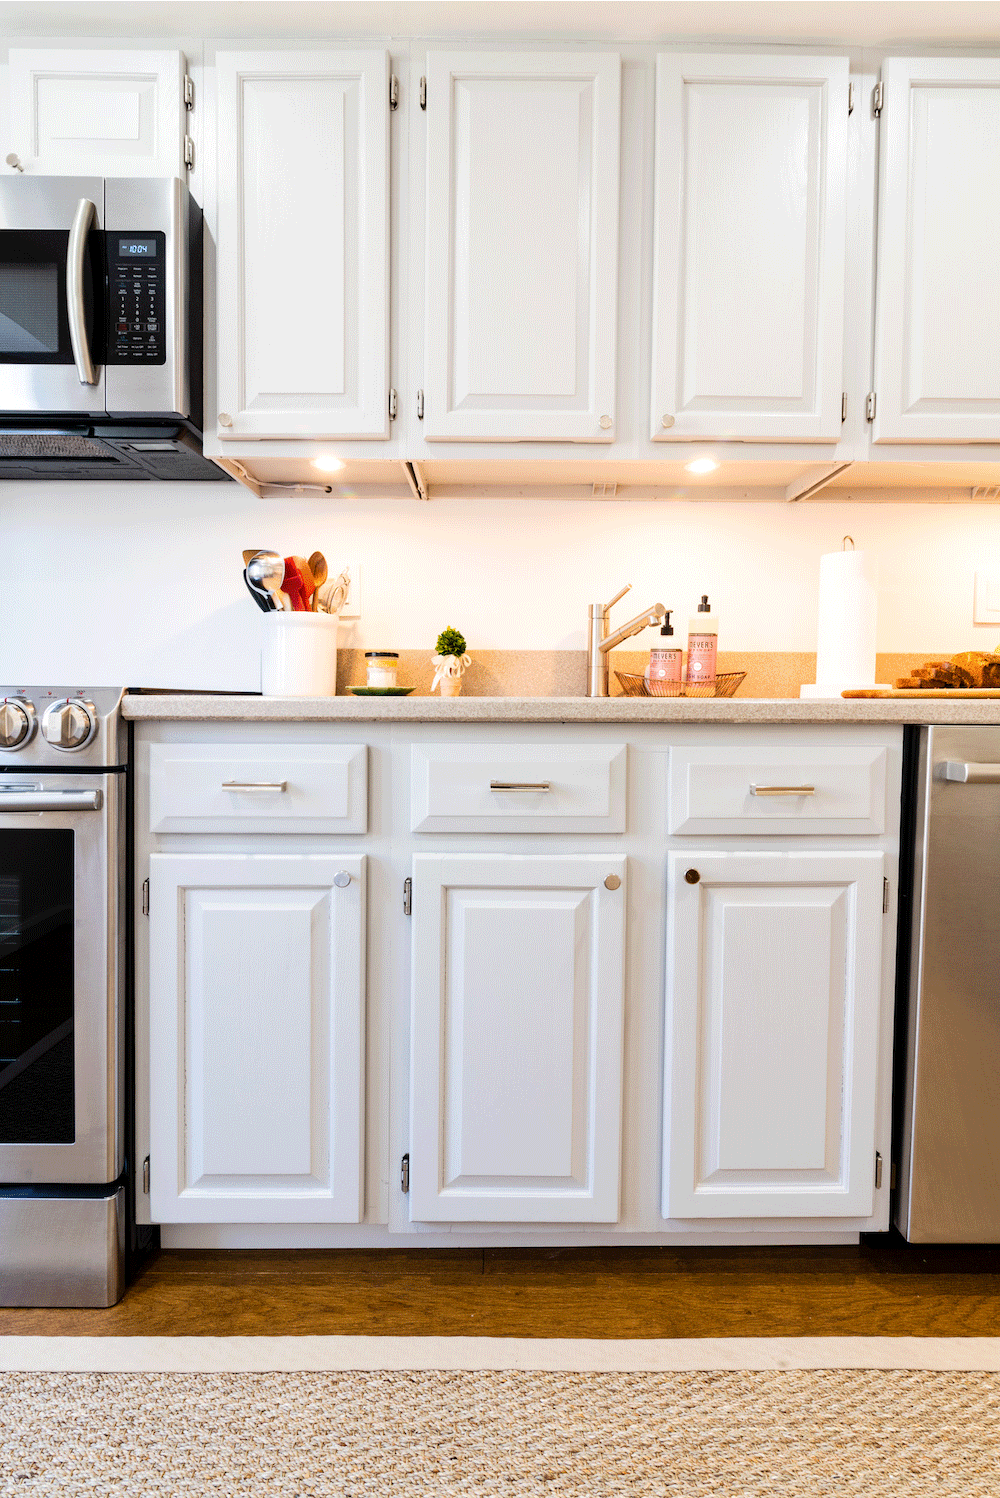 white panelled kitchen closed cabinets near appliances after renovation 